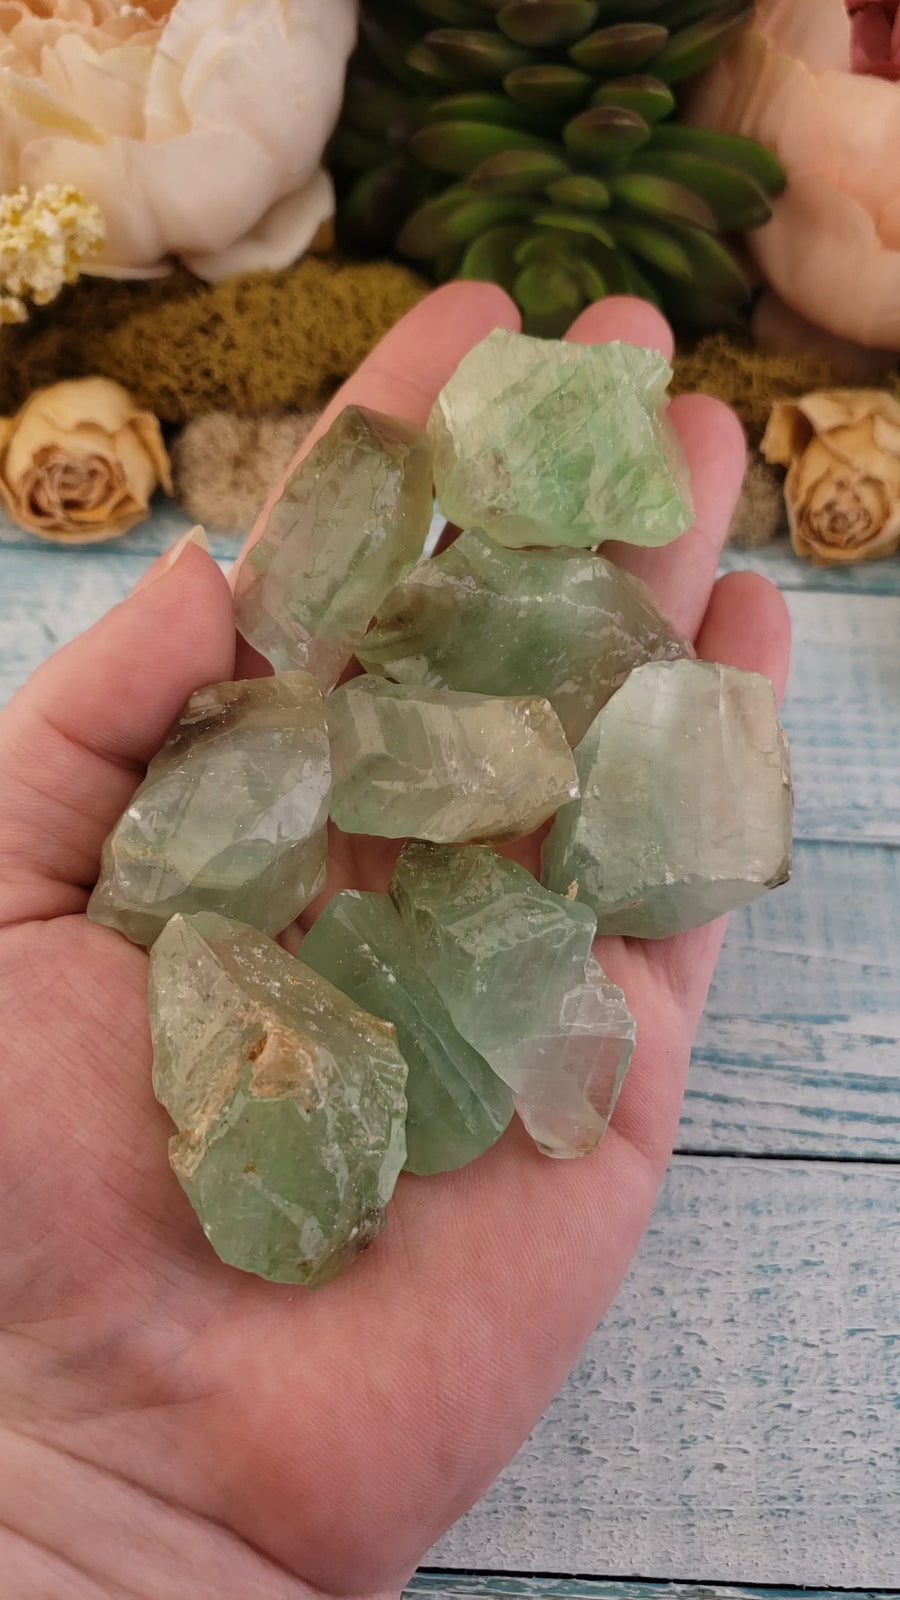 Green Calcite Raw Rough Natural Gemstone Cluster - Single Stone